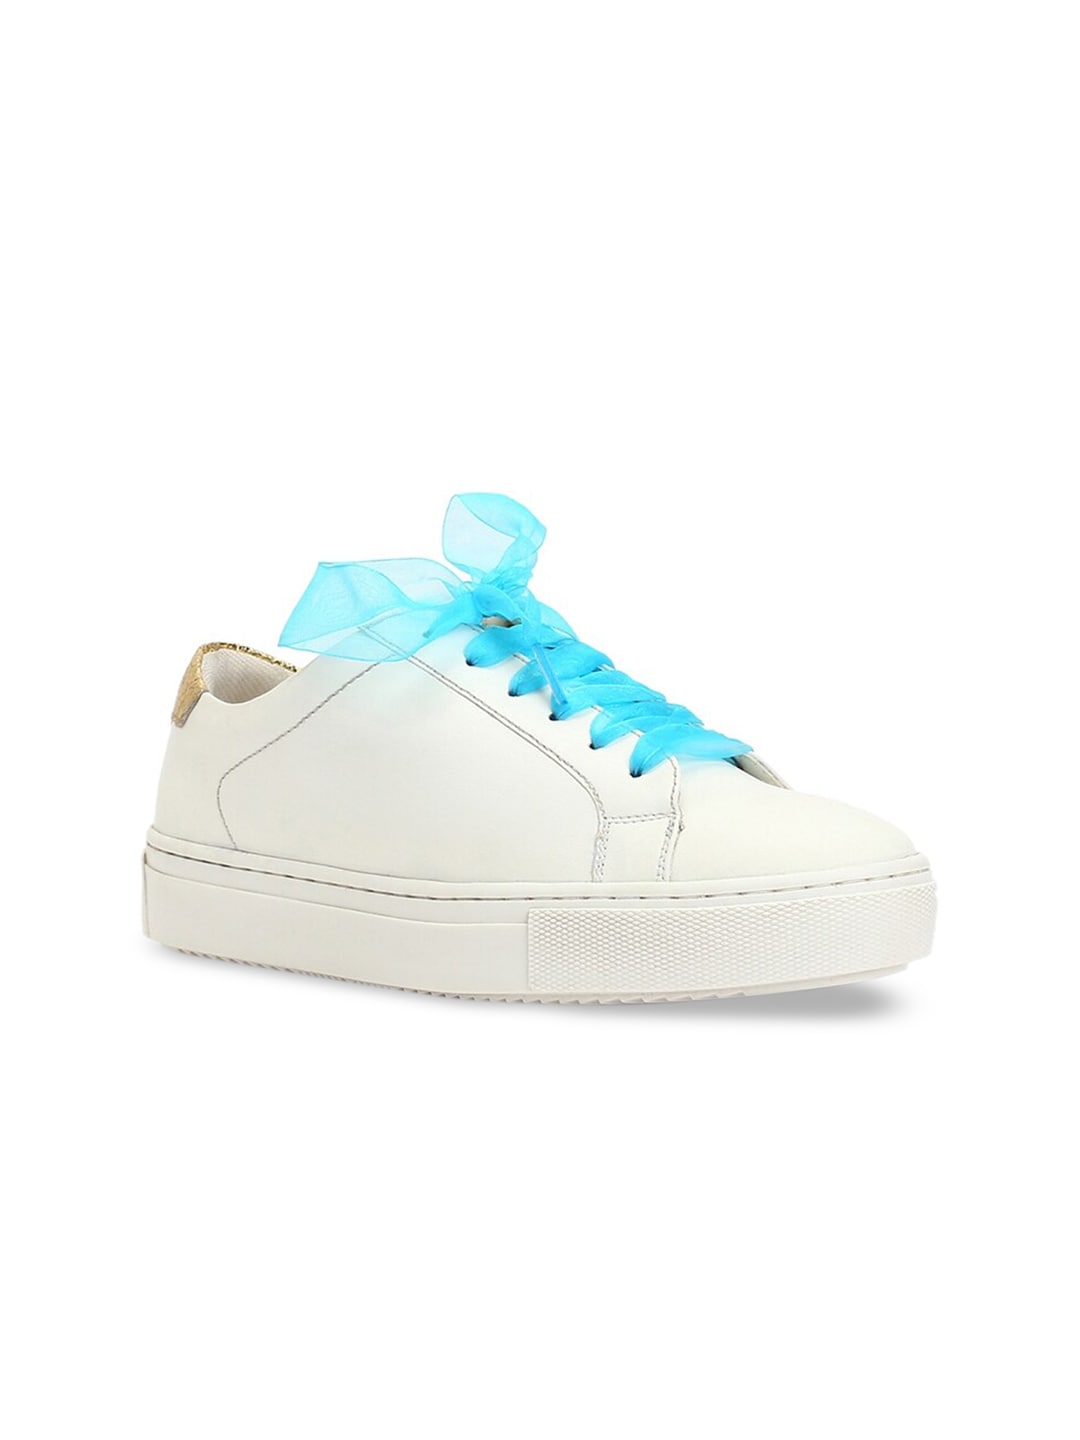 FOREVER 21 Women White Solid Sneakers Price in India